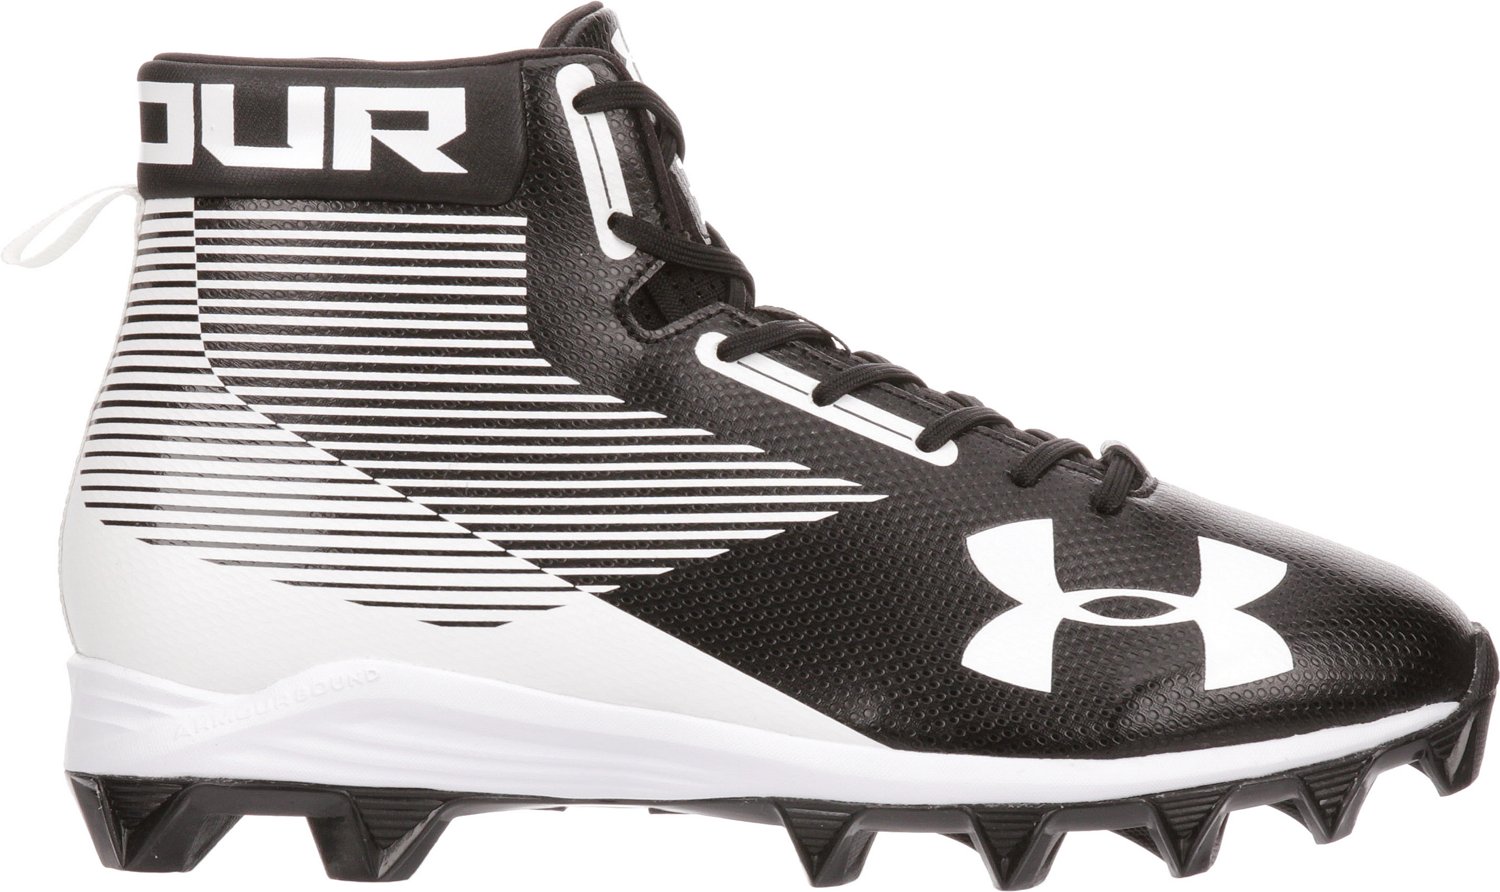 Cheap under armor youth football cleats 